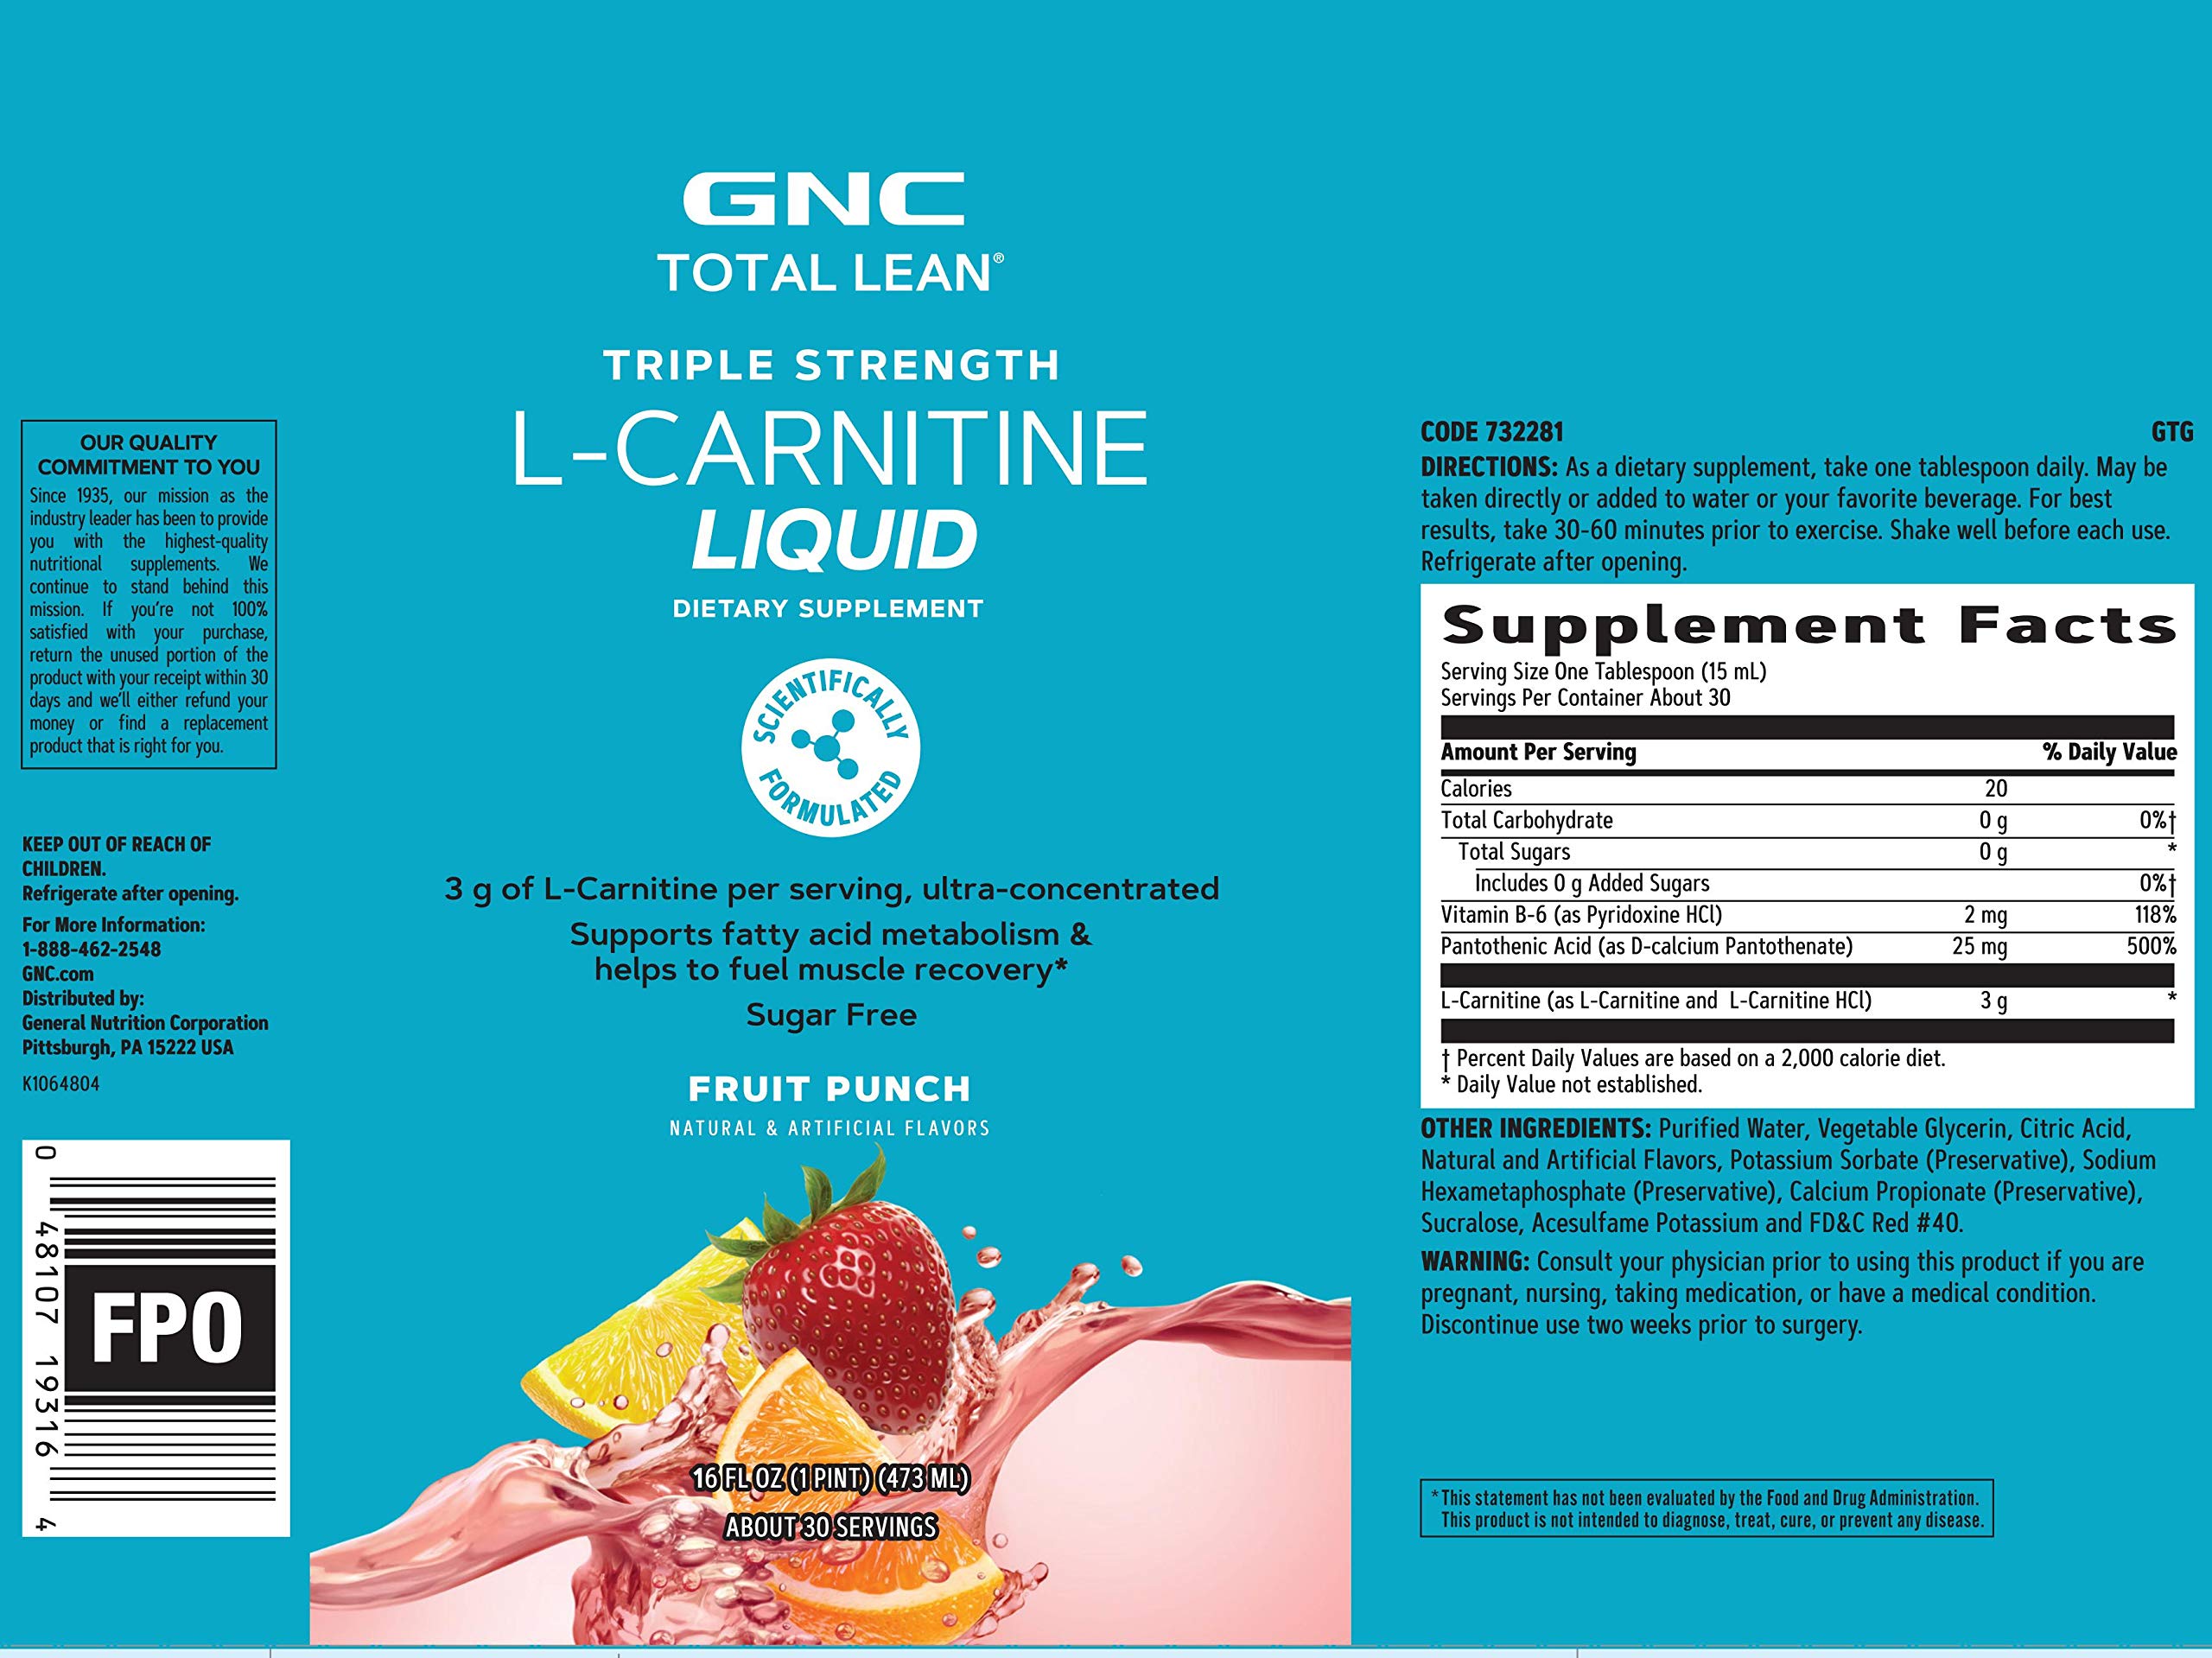 GNC Total Lean Triple Strength L-Carnitine Liquid | Supports Fatty Acid Metabolism and Helps to Fuel Muscle Recovery, Sugar Free | Fruit Punch | 16 fl.oz